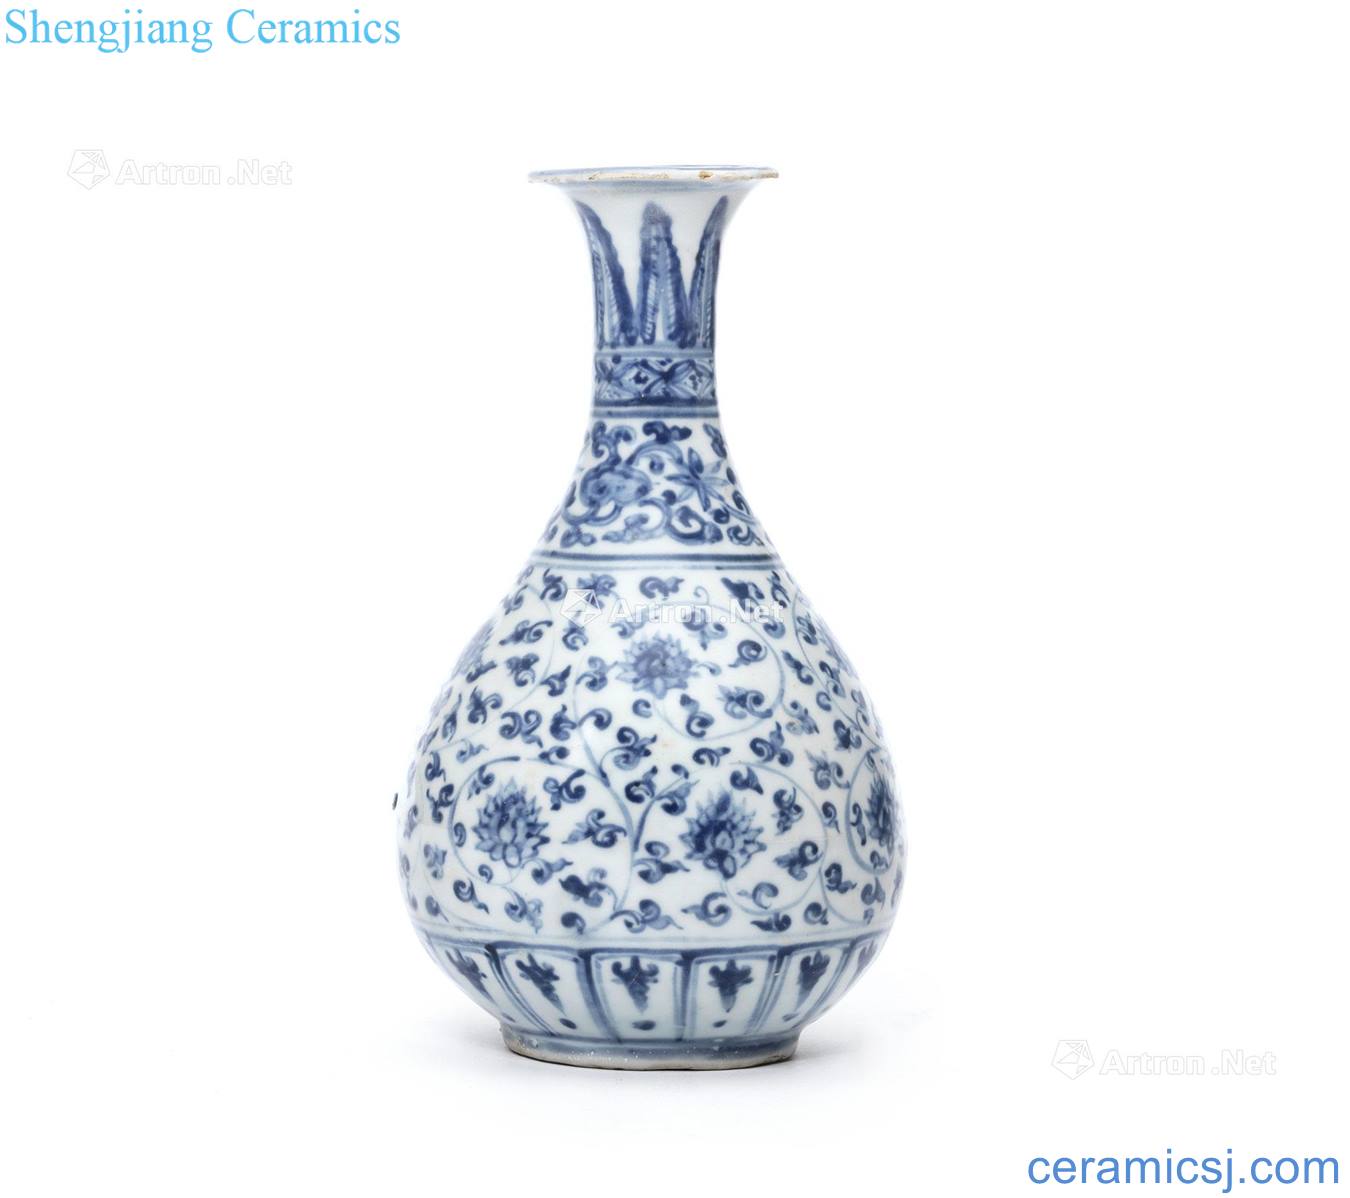 About 1500 years Blue and white lotus flower grain okho spring bottle